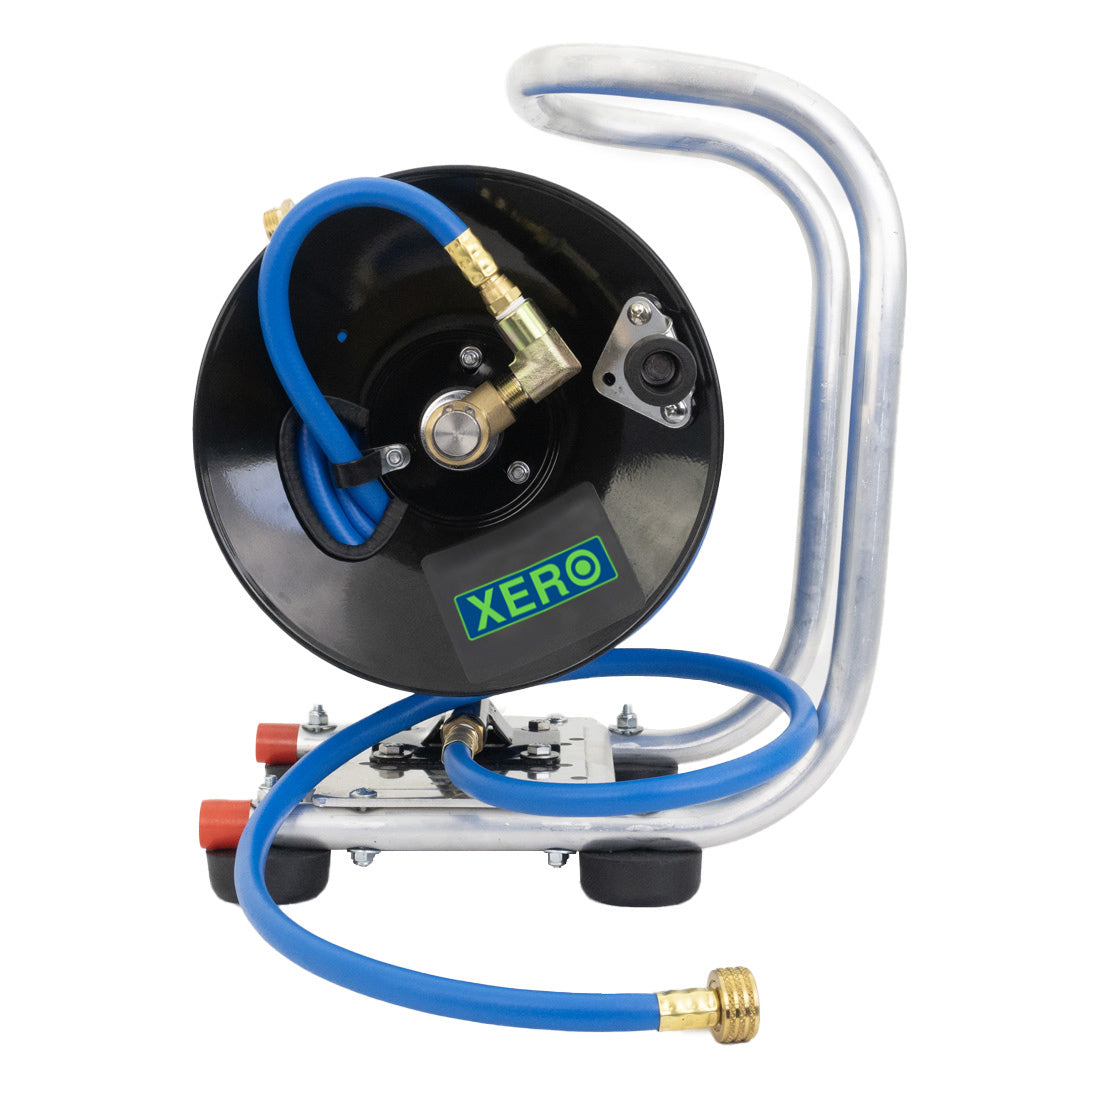 Full Frame Titan Hose Reel Special Buy at Pressure Washer Products - Non  Pressure Roof Cleaning Products - The Roof Cleaning Institute Of America